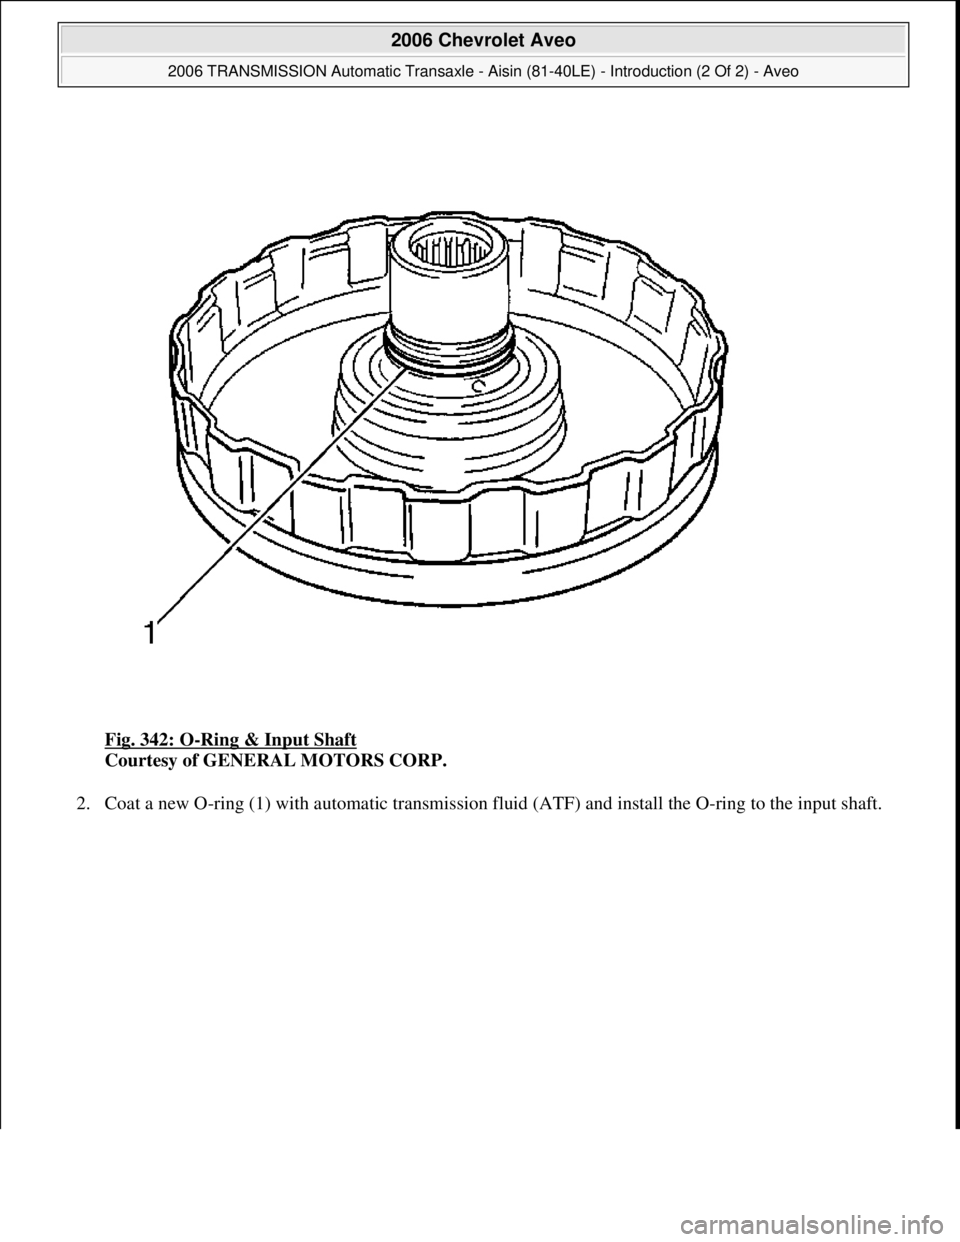 CHEVROLET AVEO 2002  Service Owners Guide Fig. 342: O-Ring & Input Shaft 
Courtesy of GENERAL MOTORS CORP. 
2. Coat a new O-ring (1) with automatic transmission fluid (ATF) and install the O-ring to the input shaft. 
 
2006 Chevrolet Aveo 
20